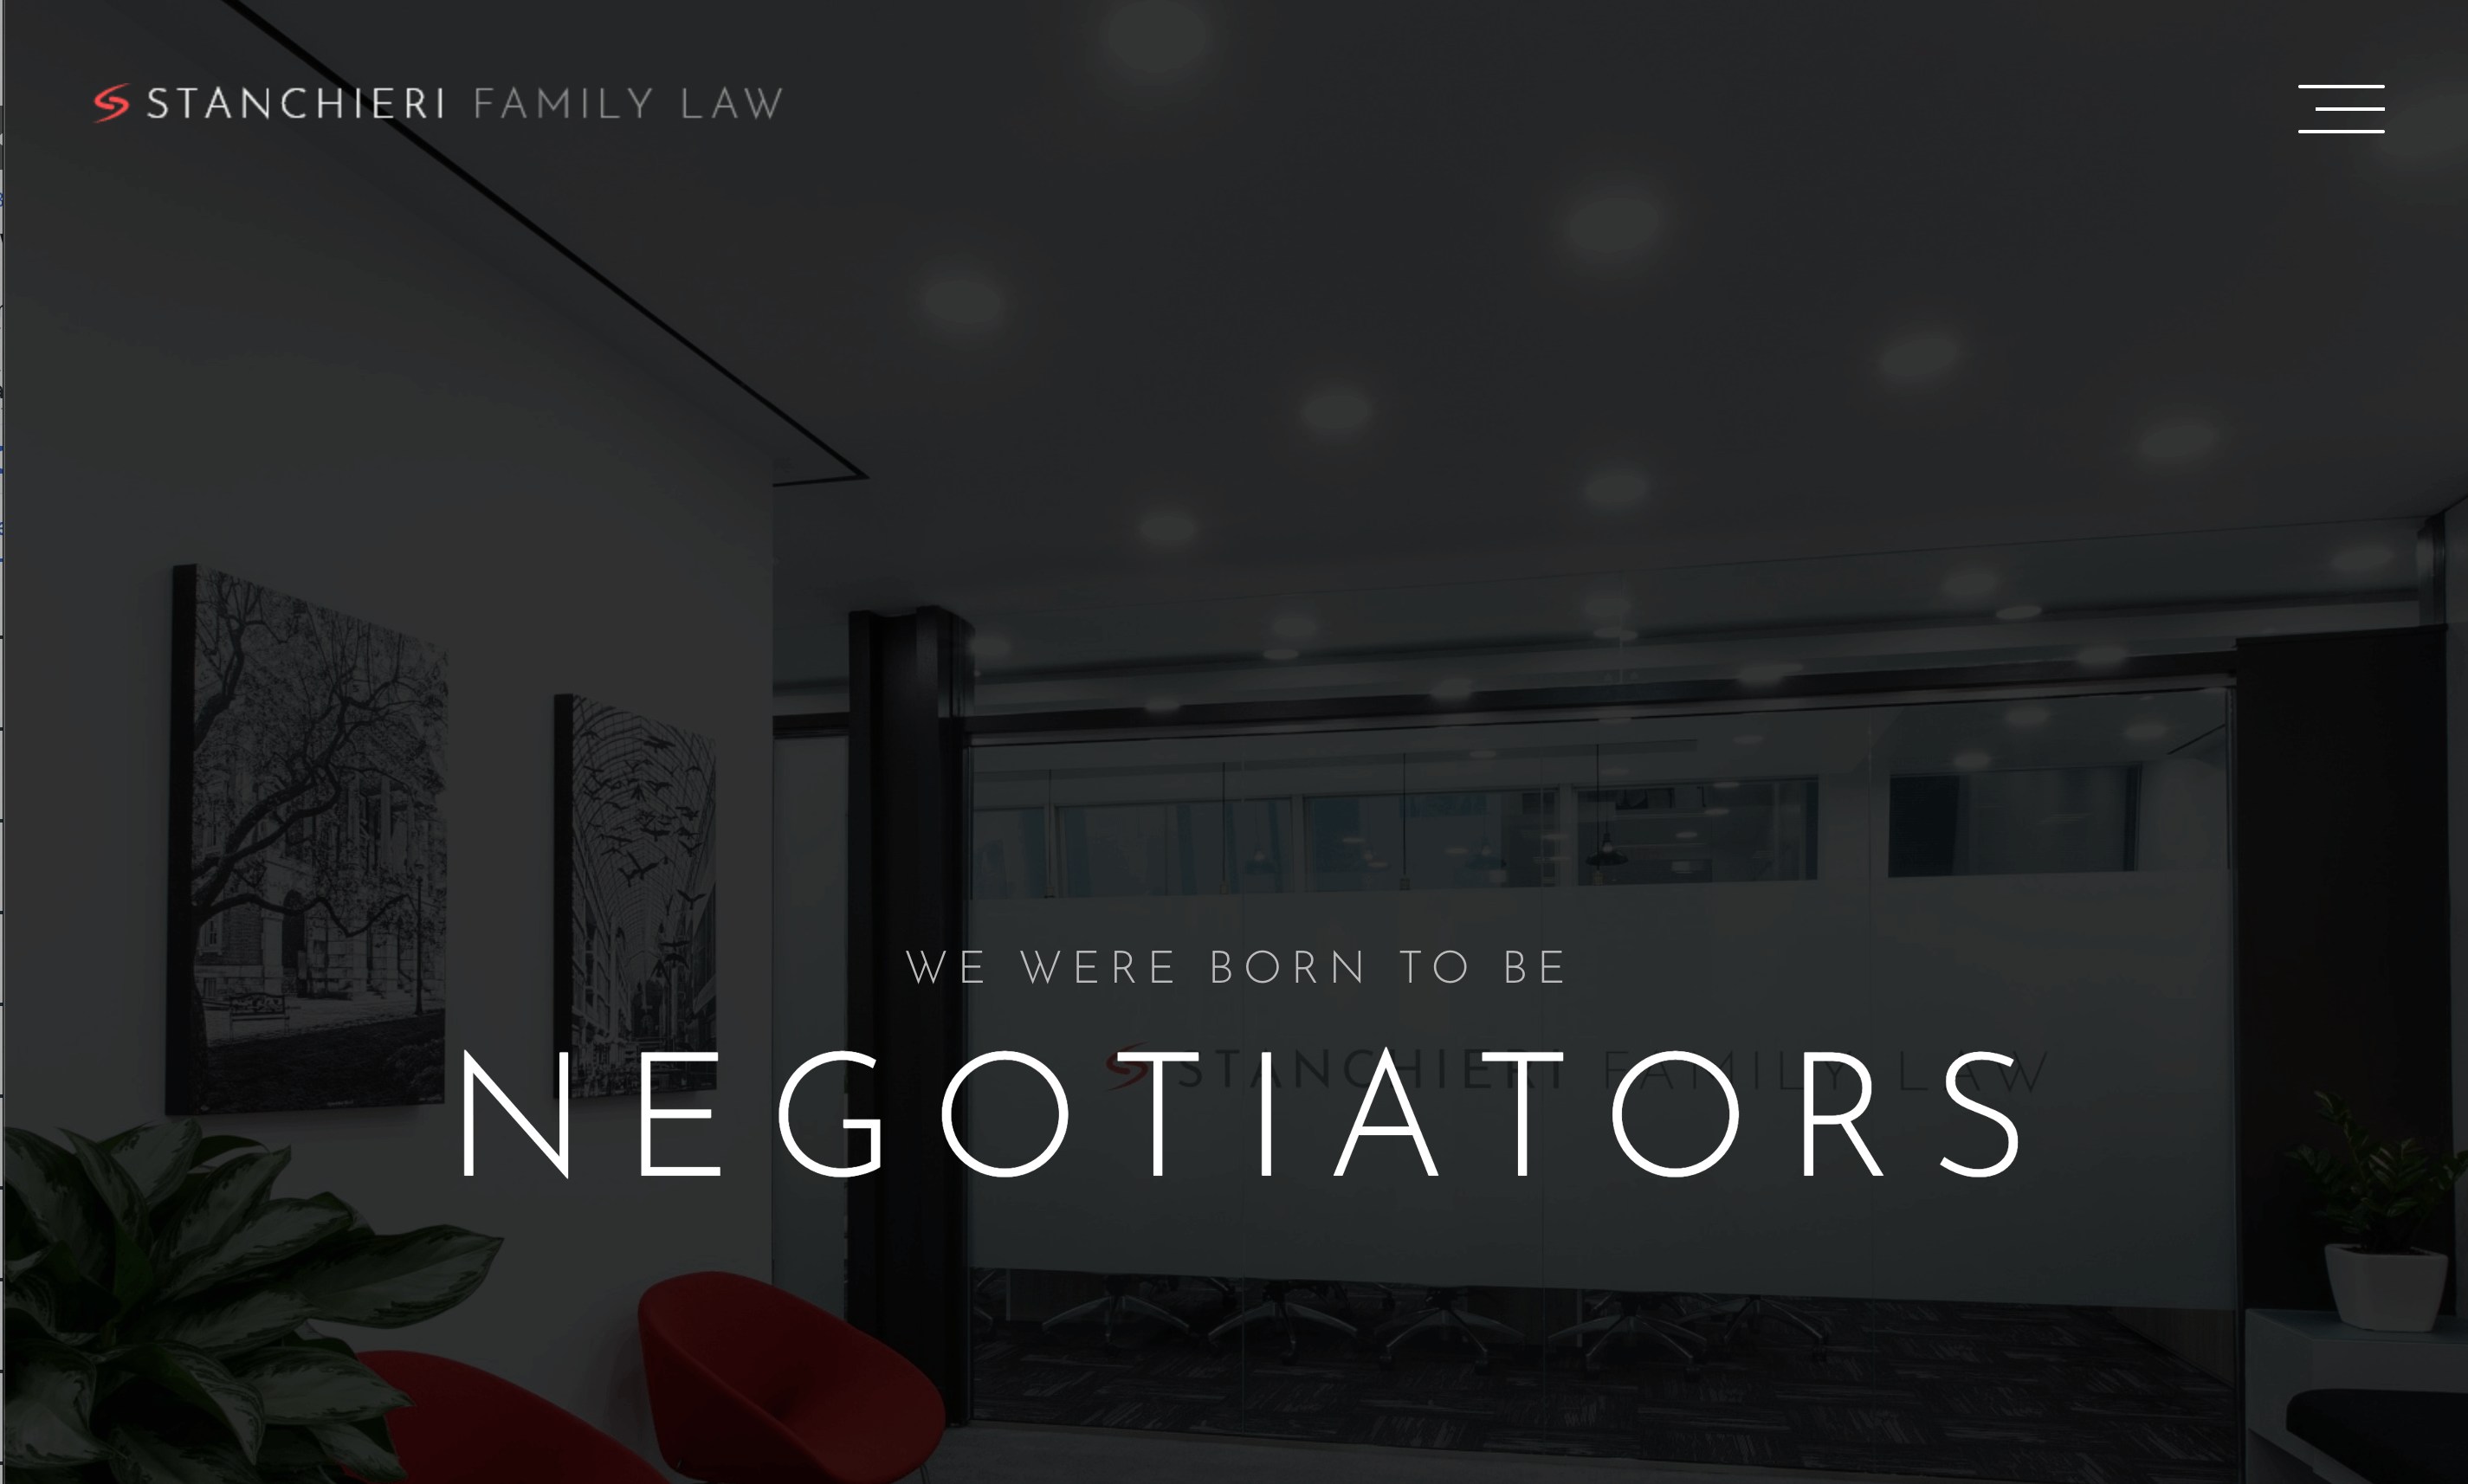 Stanchieri Family Law's website featuring the slogan "we were born to be negotiators" over a picture of the inside of their office